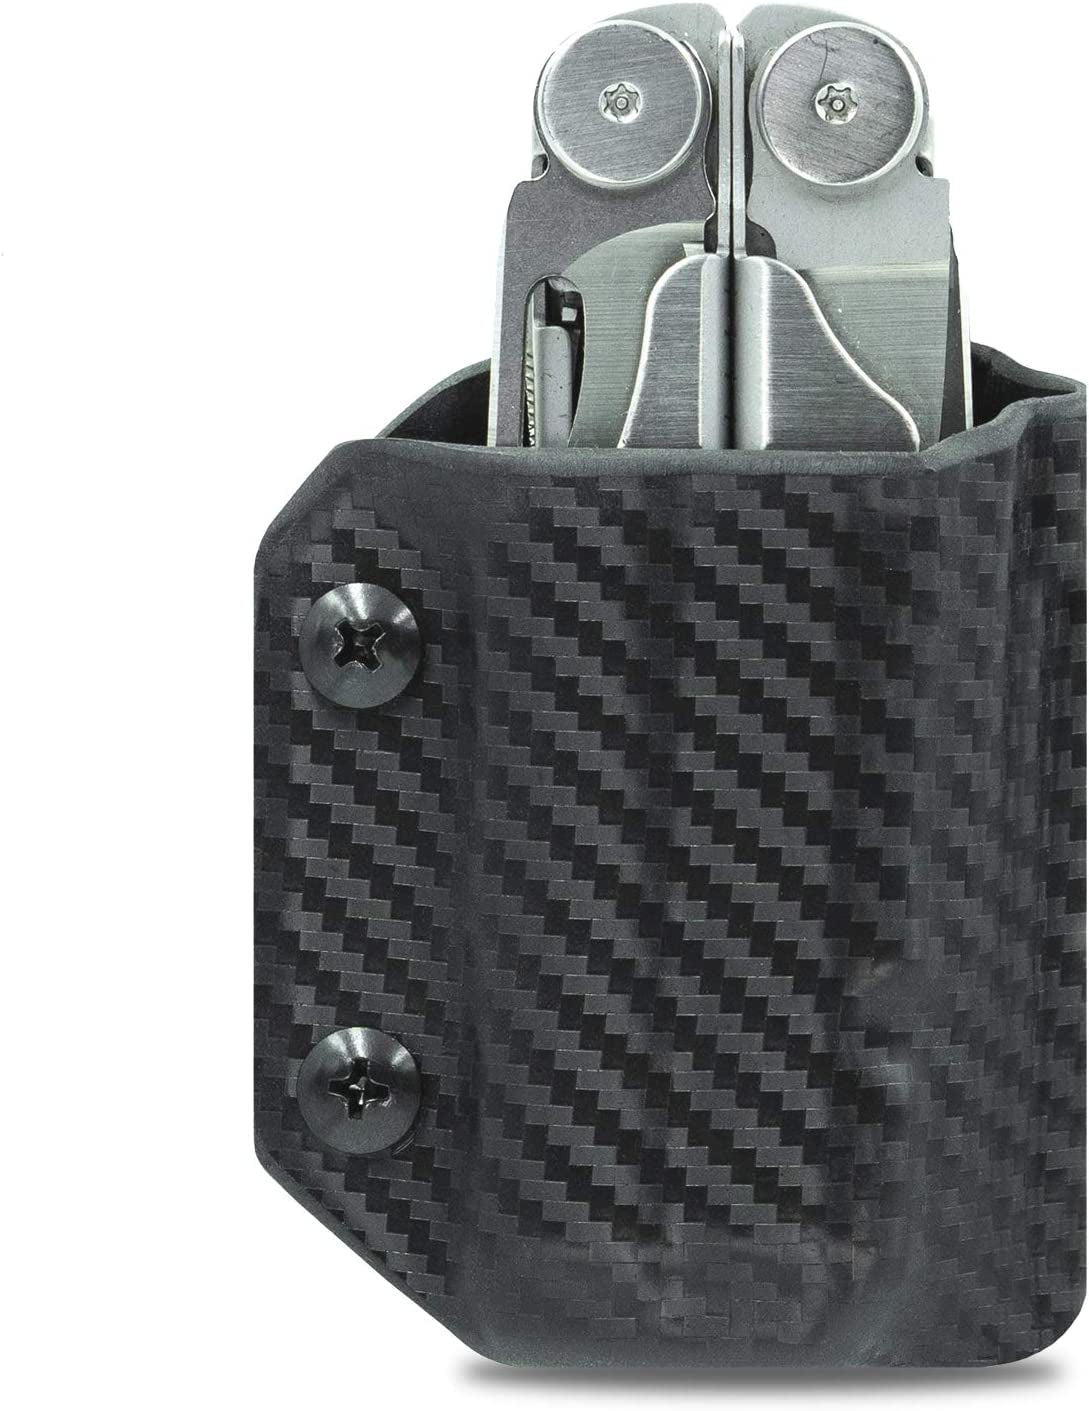 Clip & Carry, Kydex Multitool Sheath for LEATHERMAN WAVE & WAVE + plus - Made in USA - Multi Tool Sheath Holder Cover Belt Pocket Holster - Multi-Tool Not Included (Carbon Fiber Black)